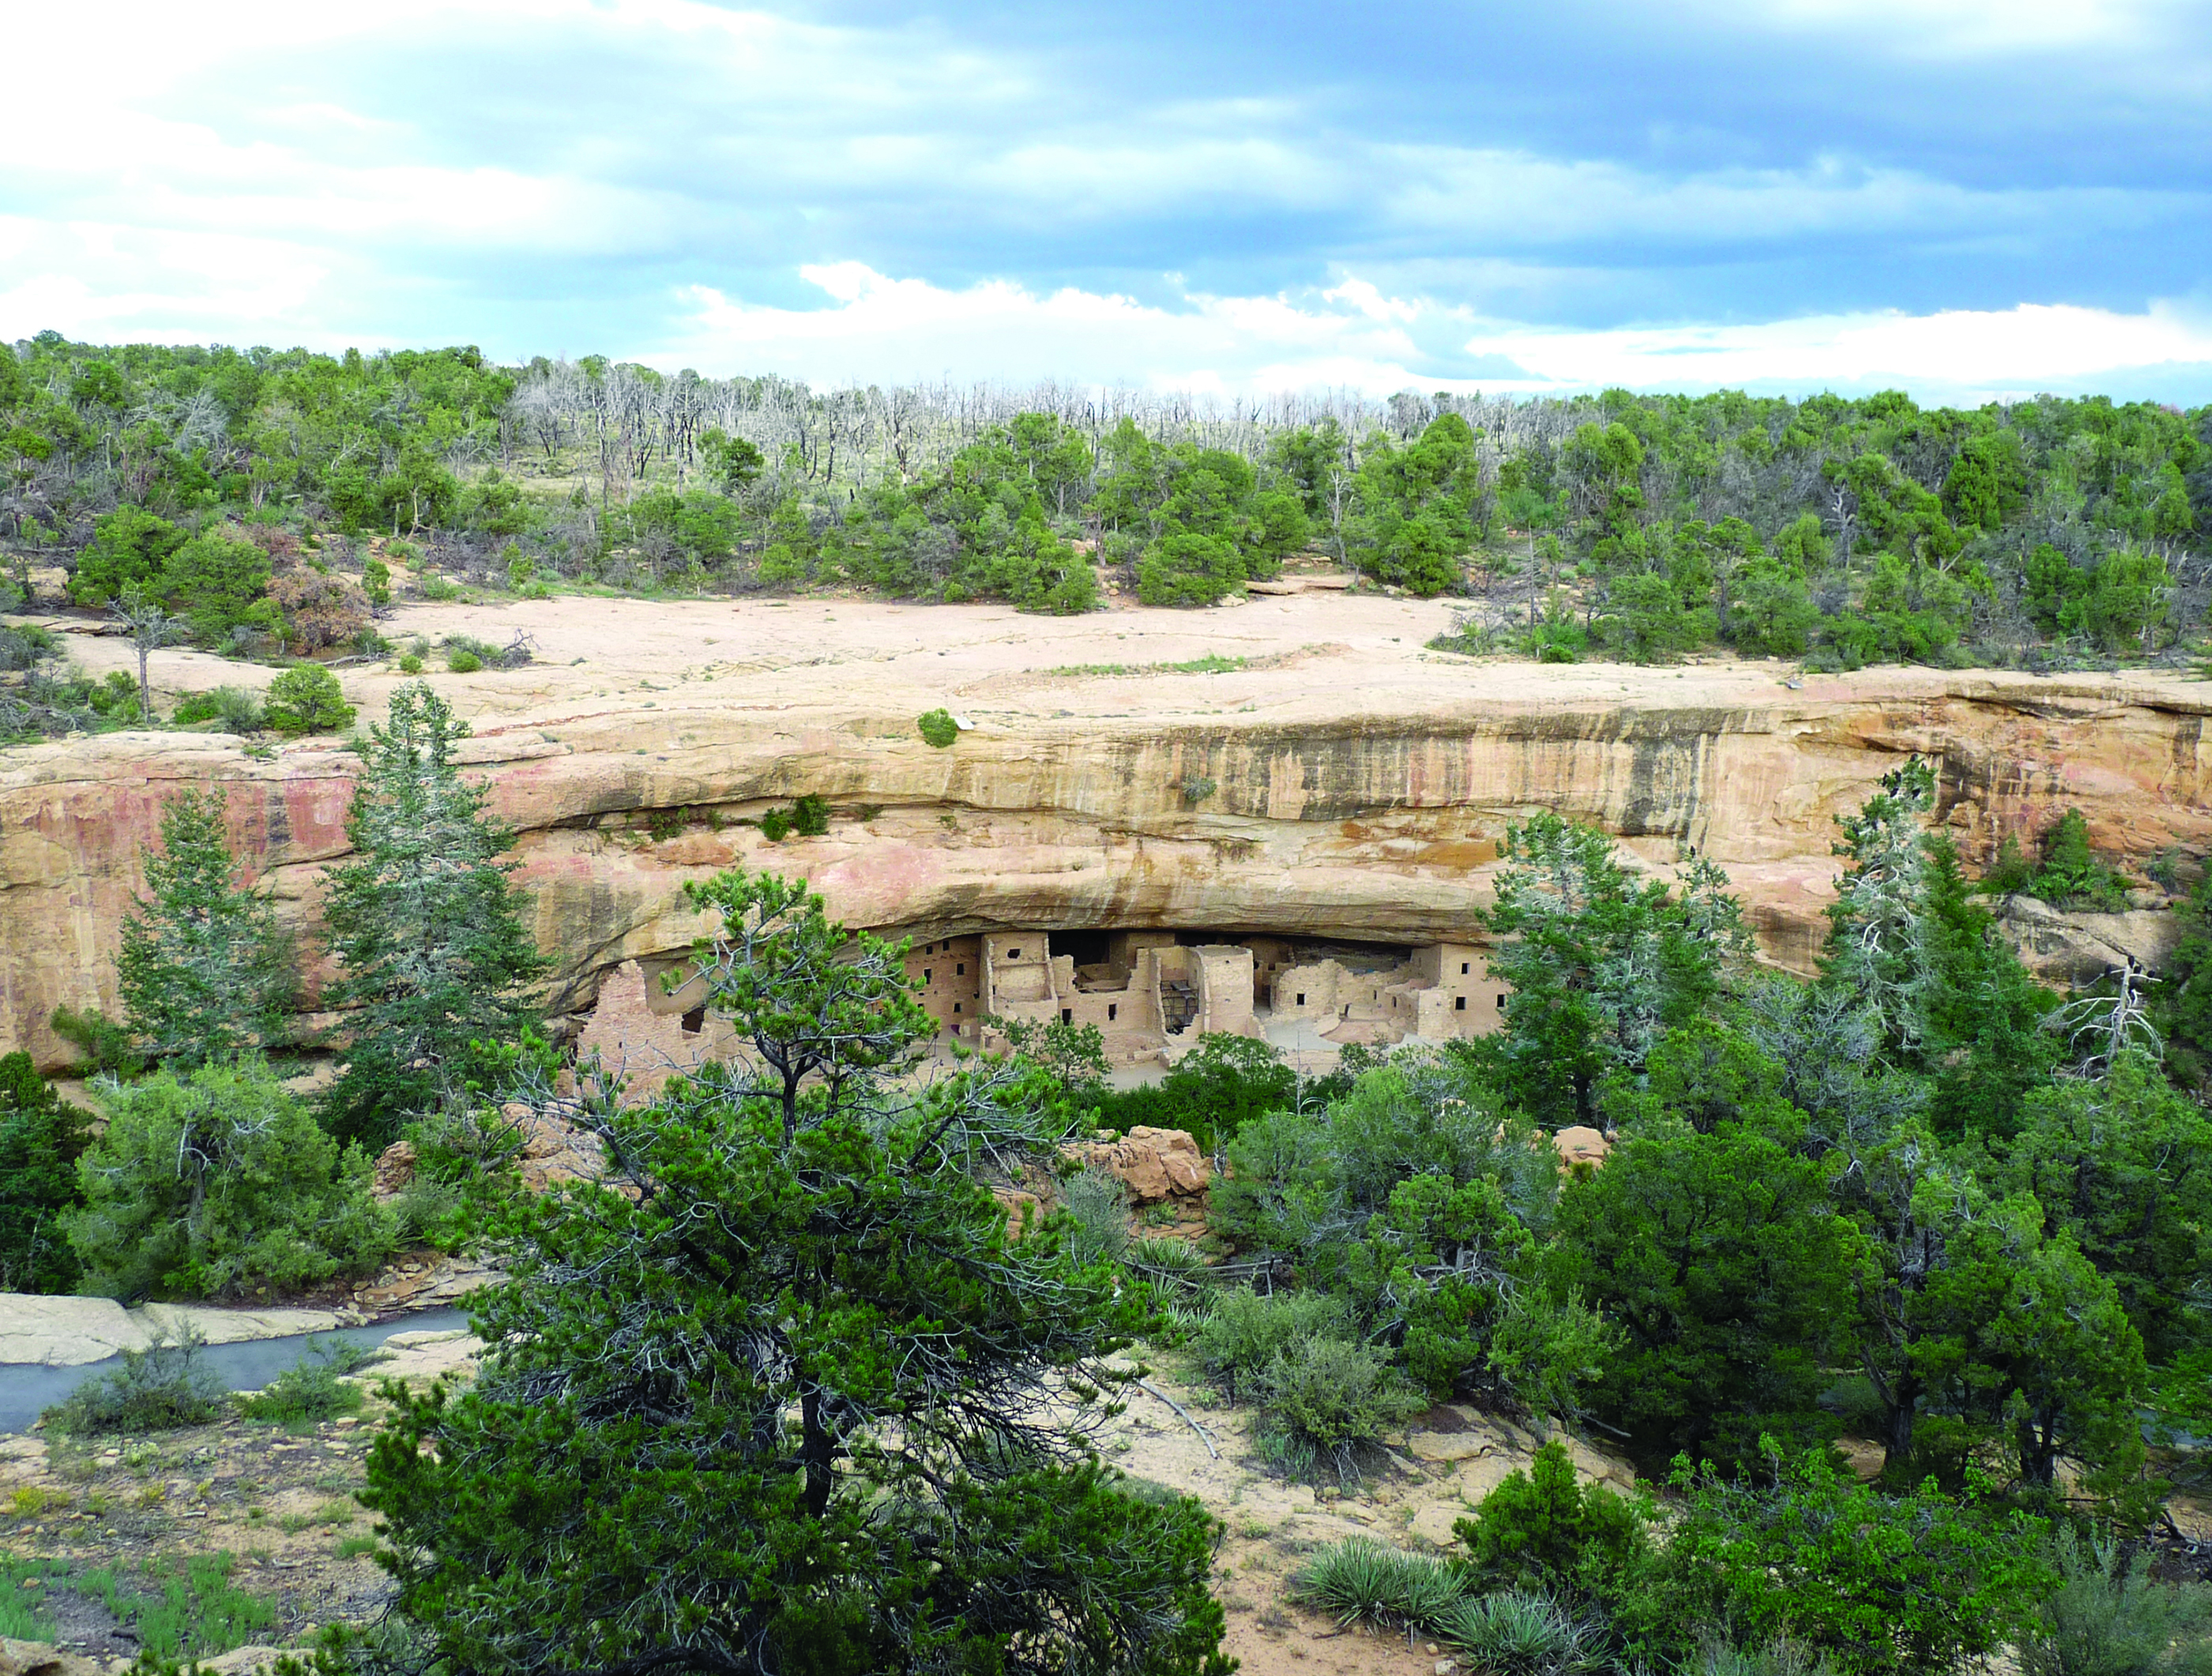 View of cliff dwelling from across canyon